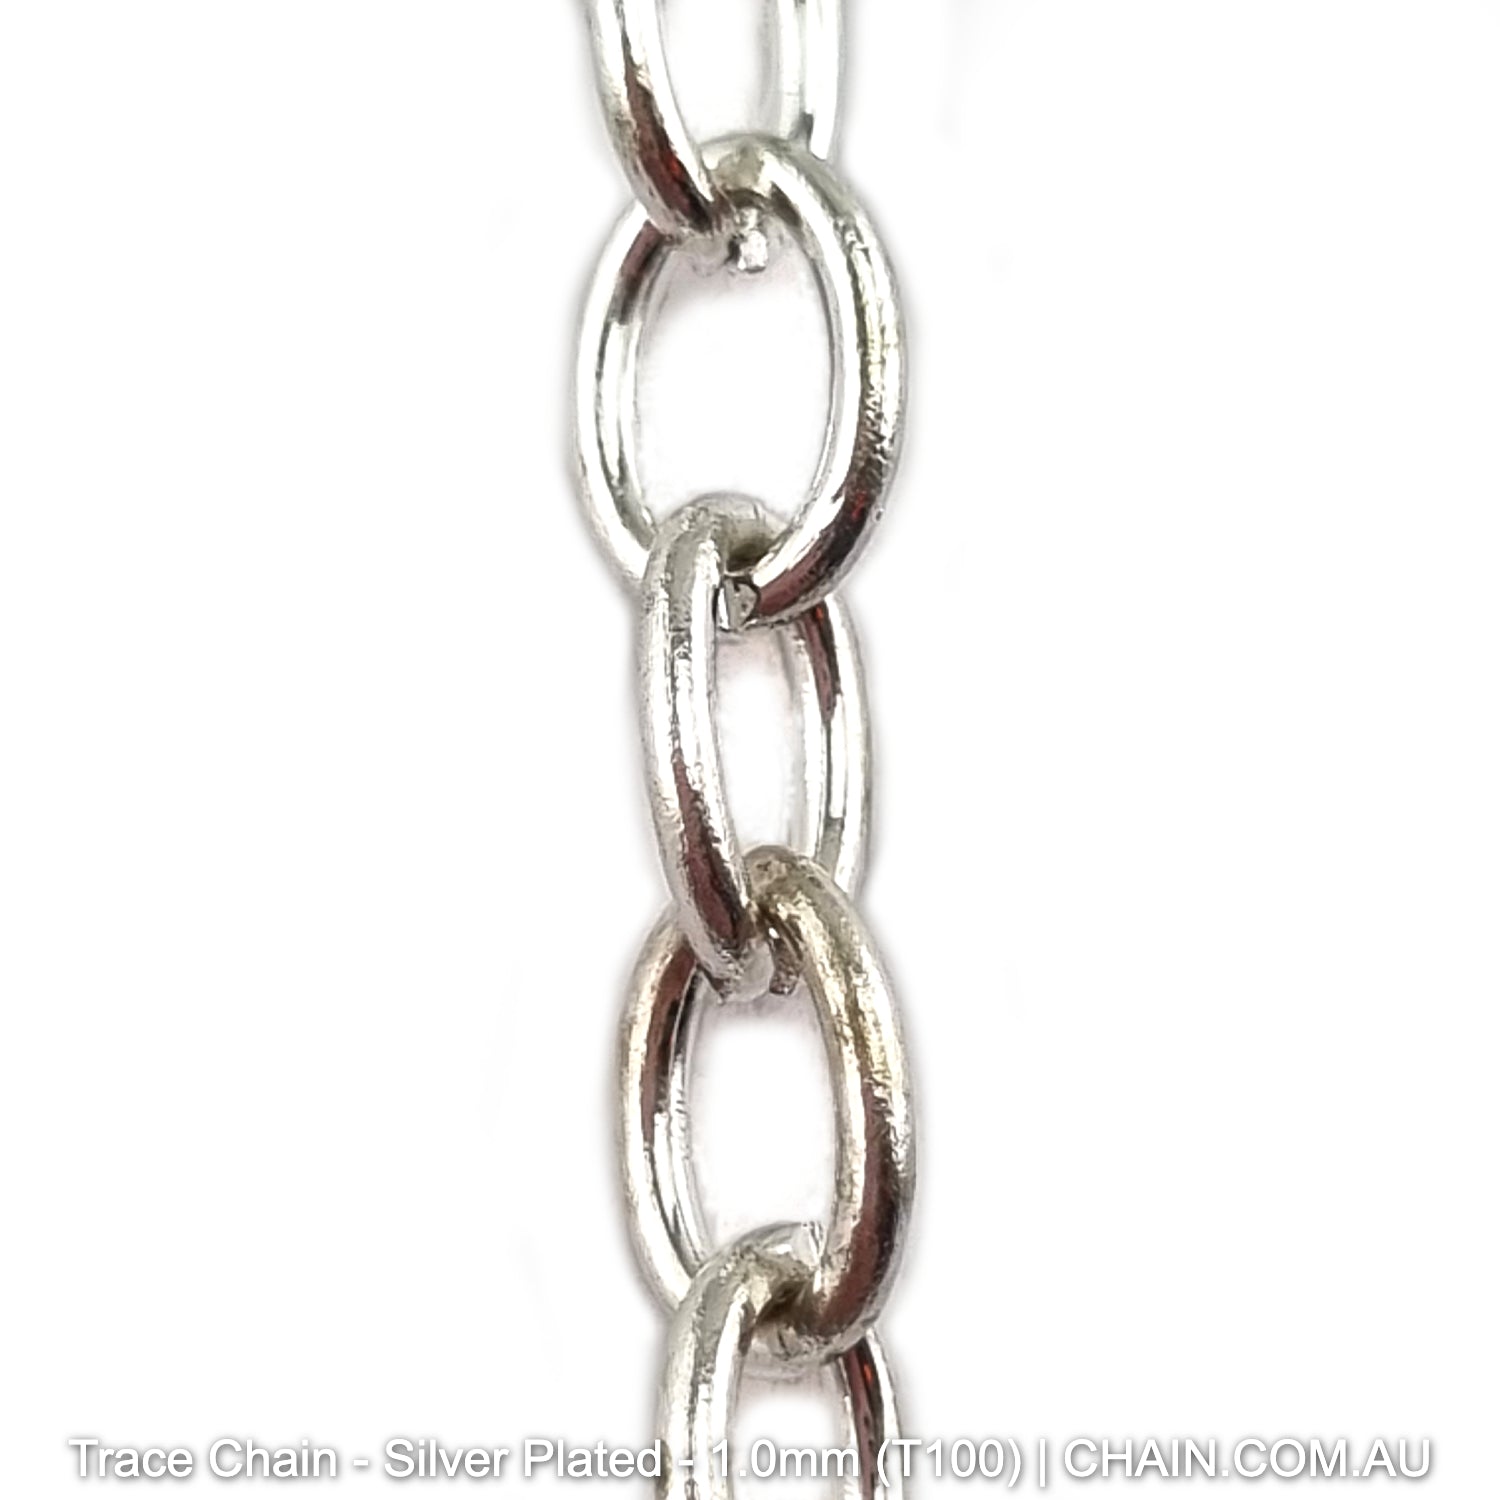 Trace Chain in a Silver Plated Finish. Size: 1.0mm, T100. Jewellery Chain, Australia wide shipping. Shop chain.com.au